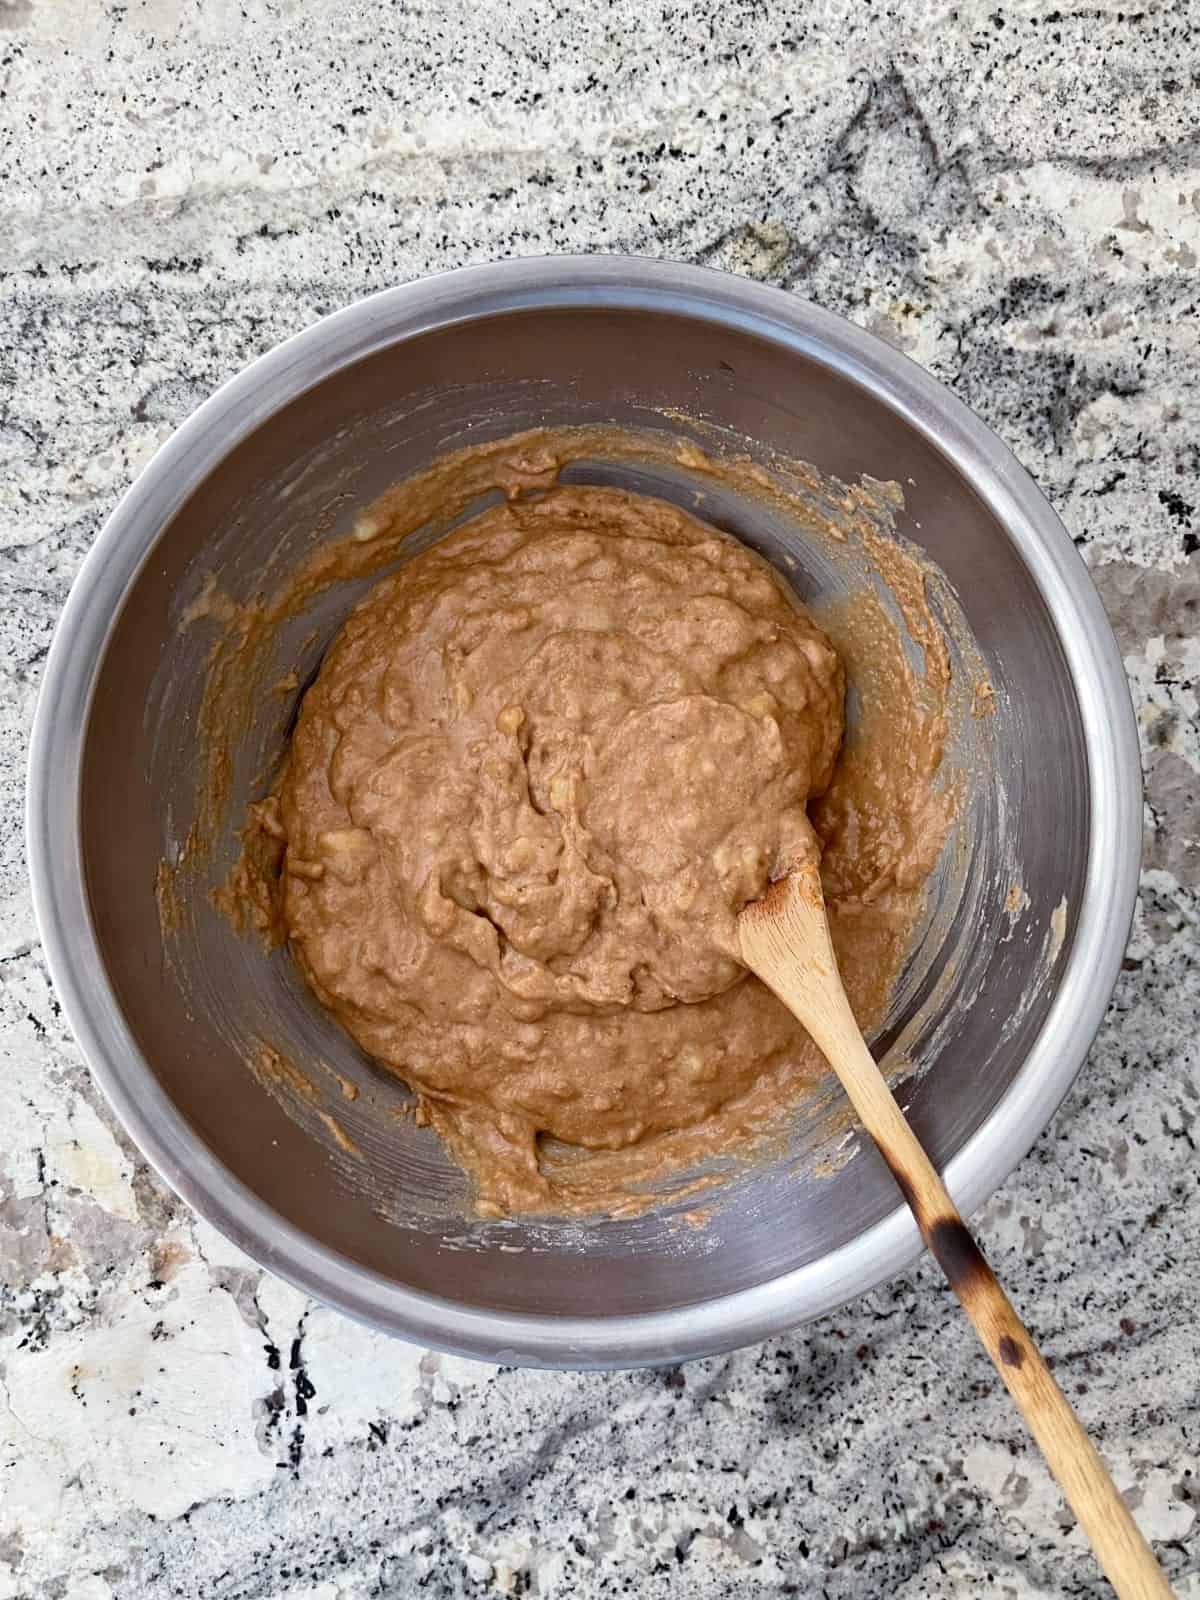 Mixing banana mocha muffin batter in bowl with wooden spoon.